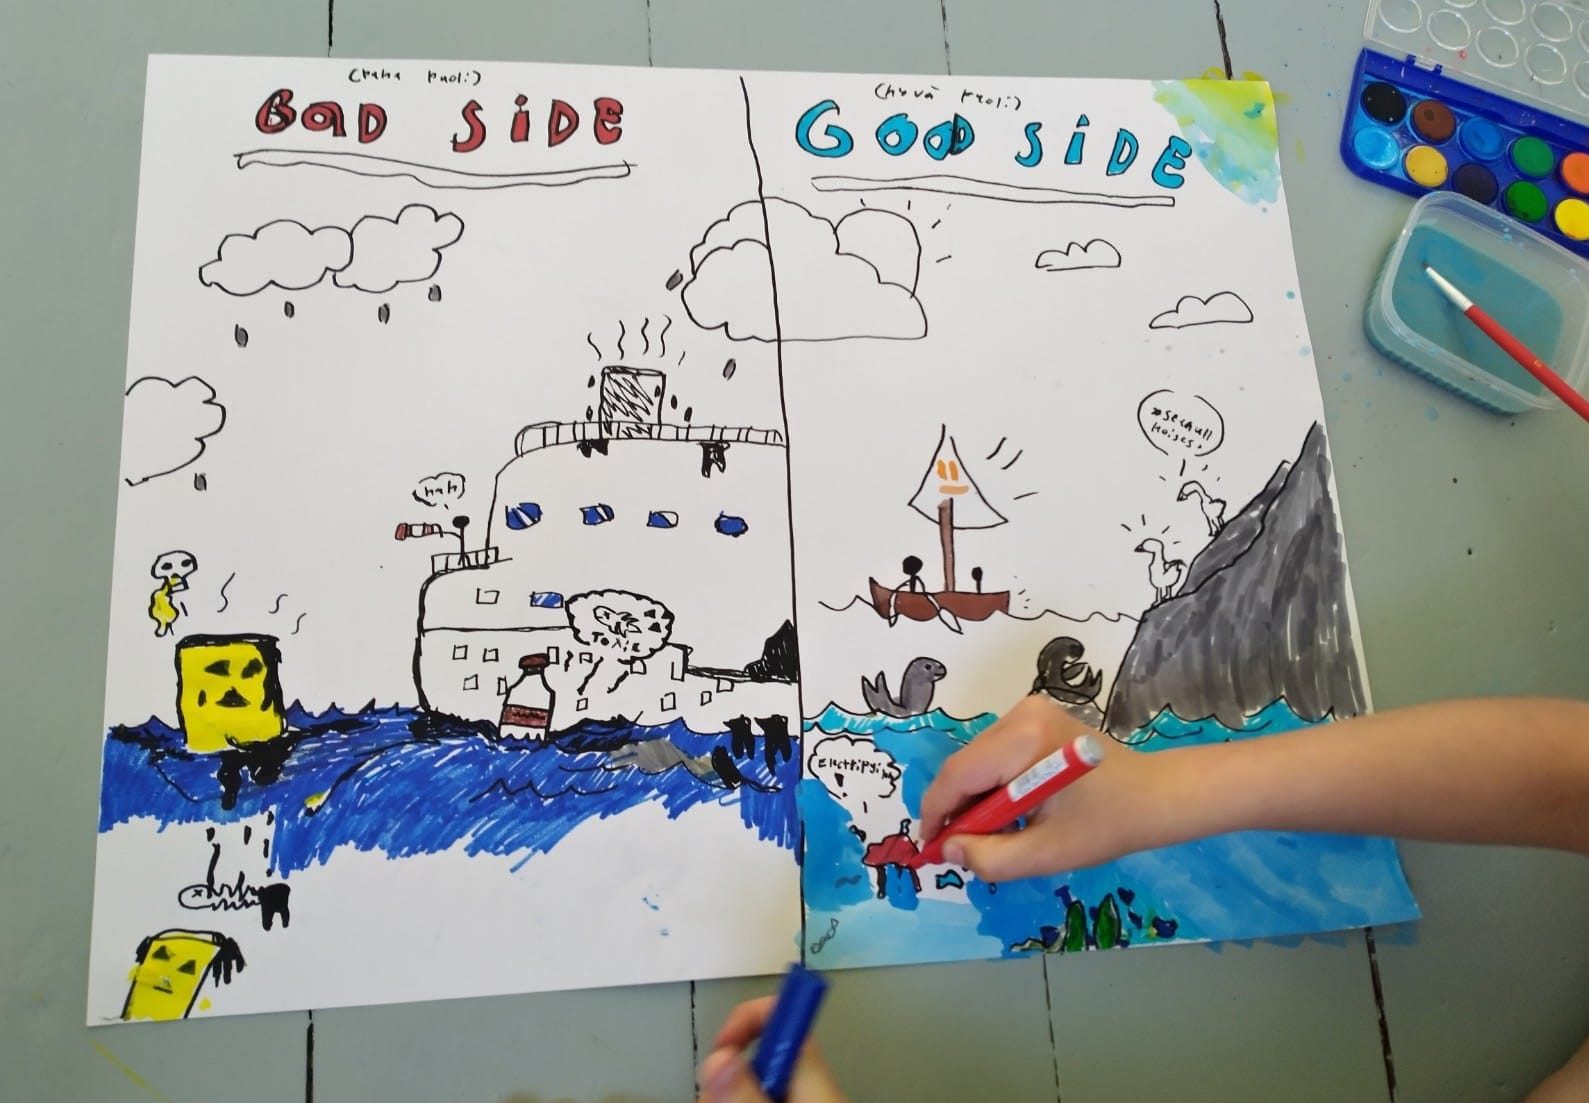 A drawing by children depicting ”bad side and good side” of sea. On the left side of the picture the bad side with oil spills, toxins and died fish, on the right side the good side with clean water, seals and other animals.